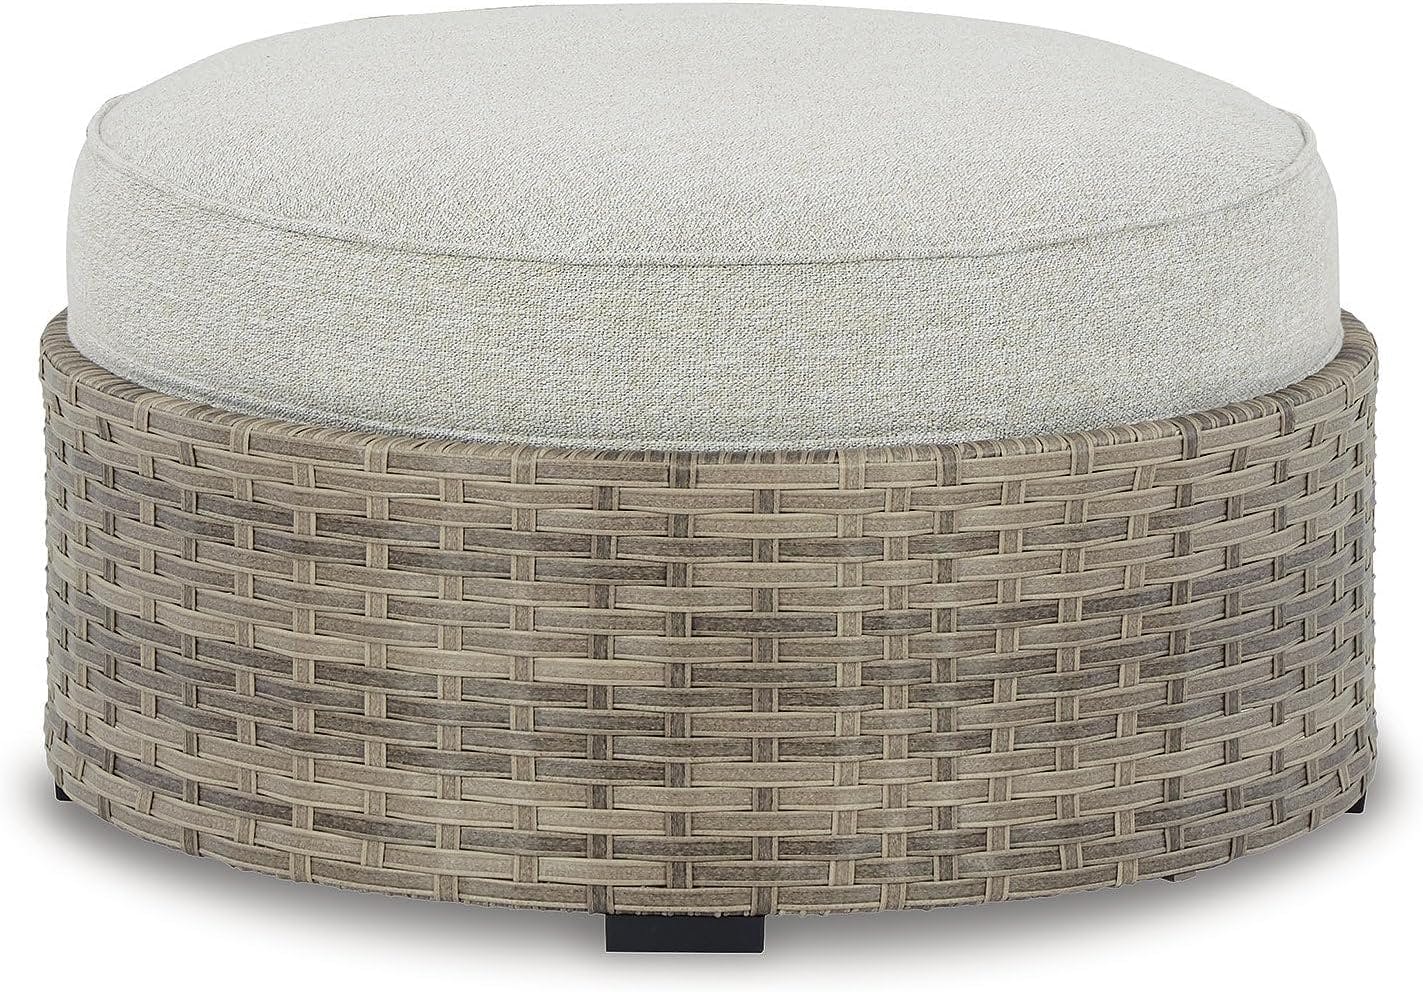 Calworth Handwoven Wicker Outdoor Ottoman with Performance Beige Cushion